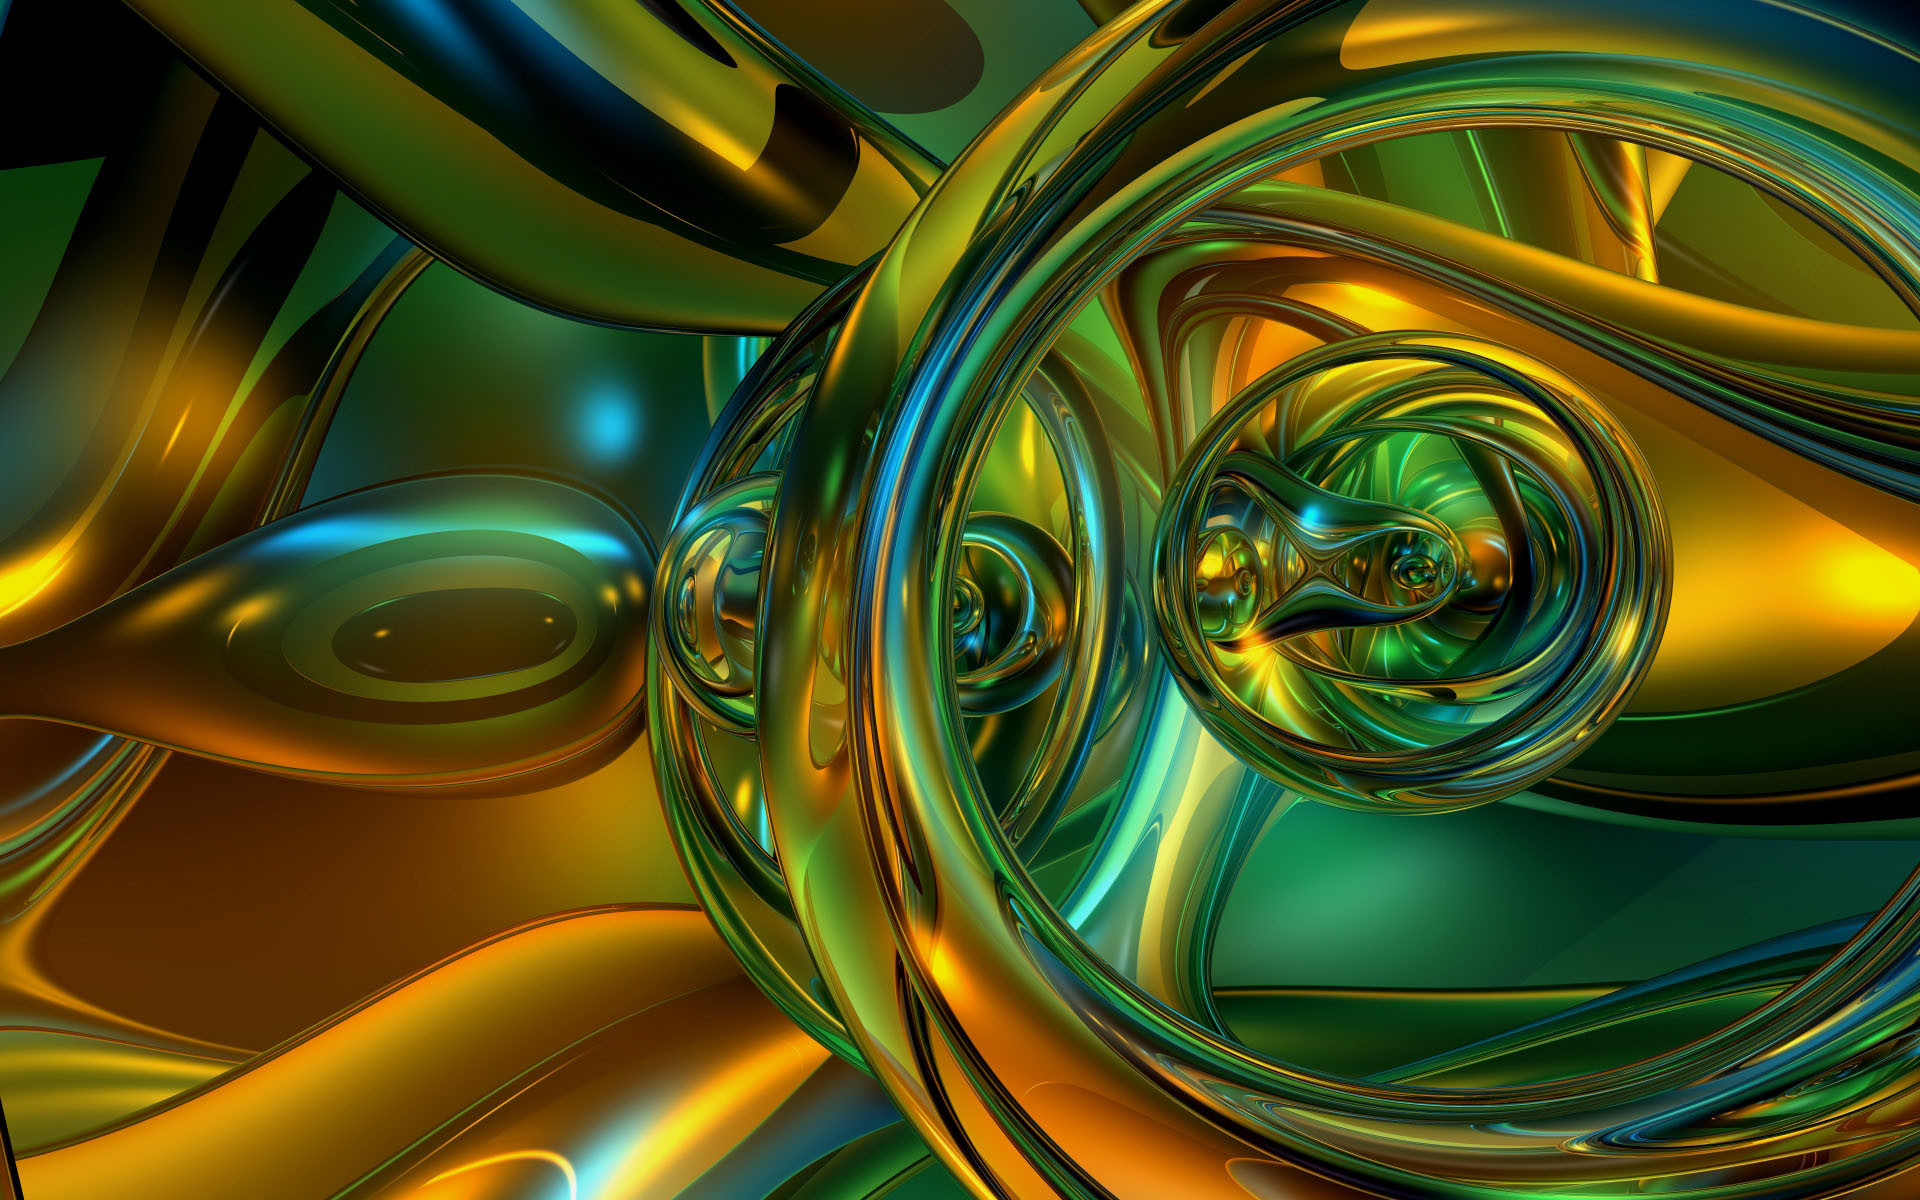 1920x1200 Download Free 3D Animated Desktop Wallpaper | Wallpapers Â» Abstract 3d  Wallpapers